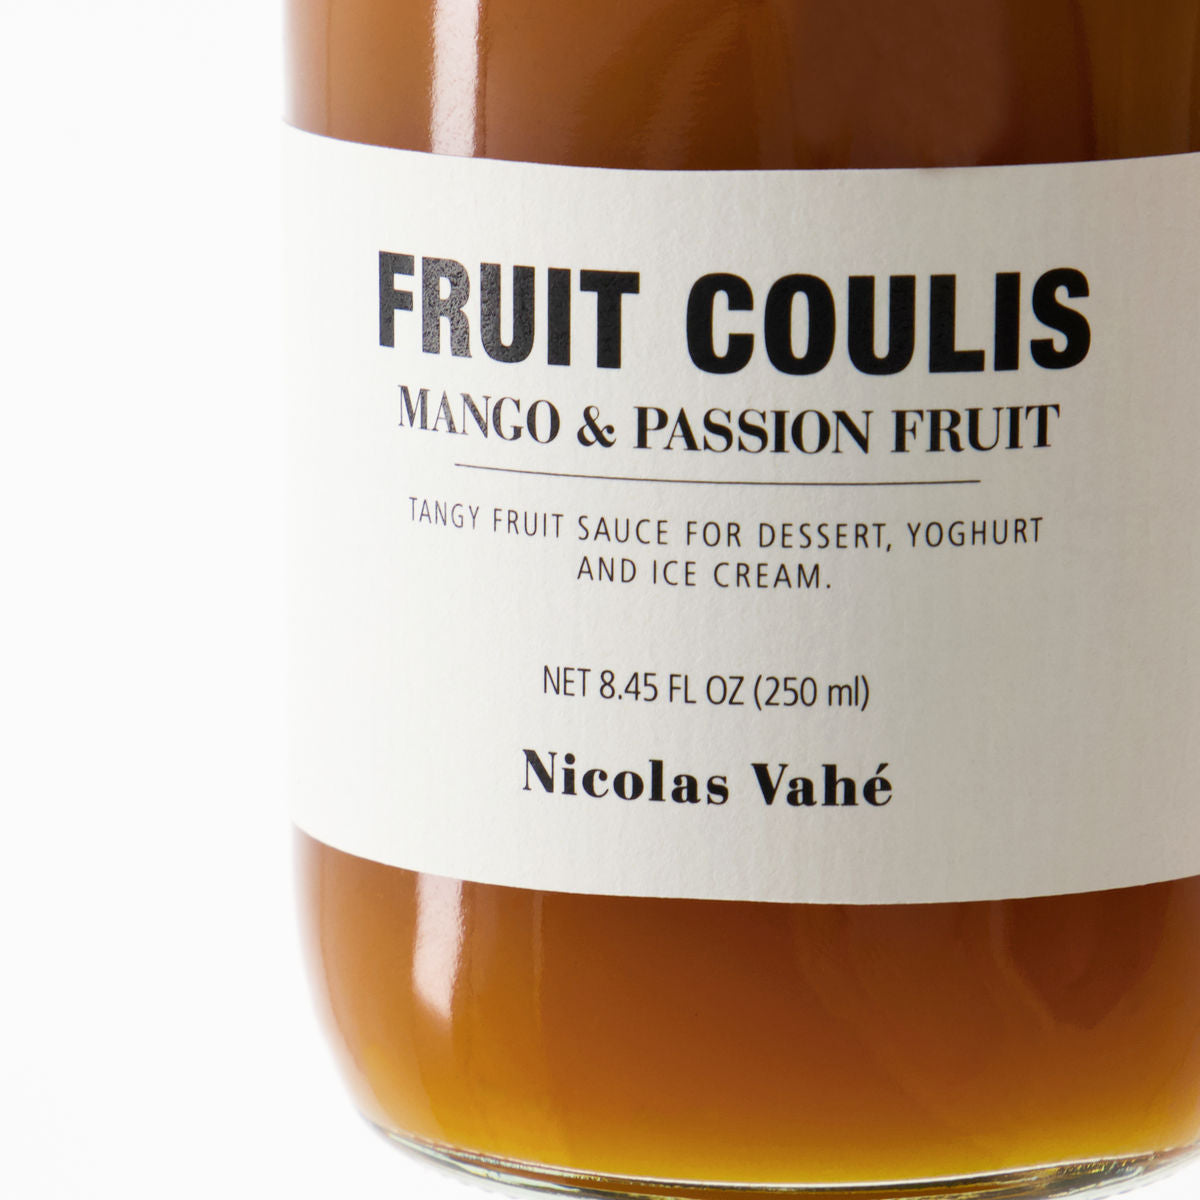 Frucht Coulis, Mango & Passionsfrucht